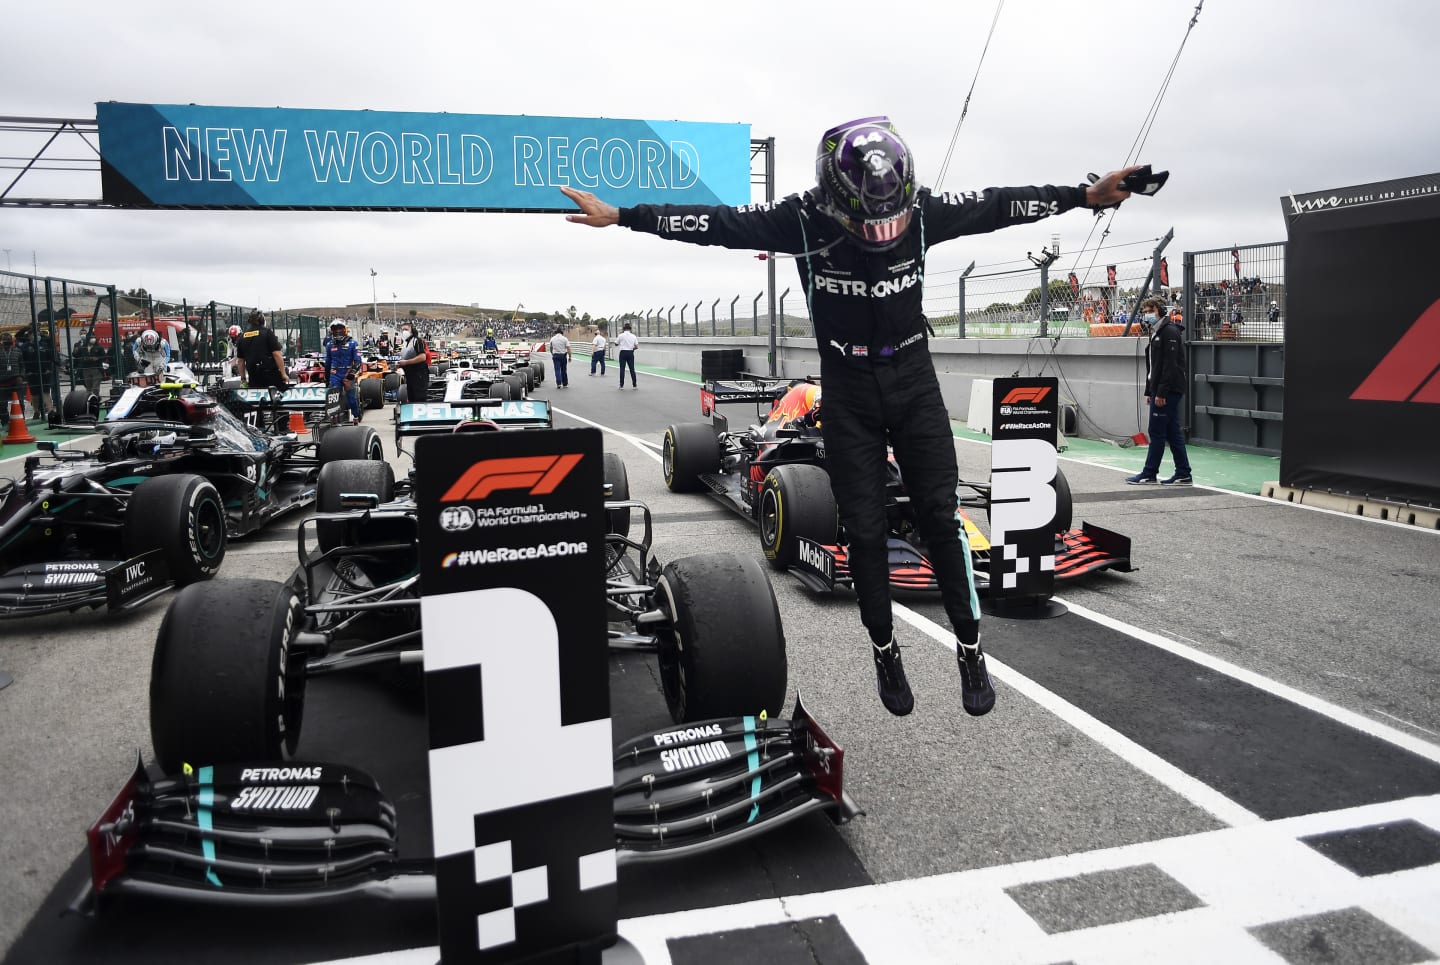 PORTIMAO, PORTUGAL - OCTOBER 25: Race winner Lewis Hamilton of Great Britain and Mercedes GP celebrates his record breaking 92nd race win in parc ferme during the F1 Grand Prix of Portugal at Autodromo Internacional do Algarve on October 25, 2020 in Portimao, Portugal. (Photo by Jorge Guerrero - Pool/Getty Images)